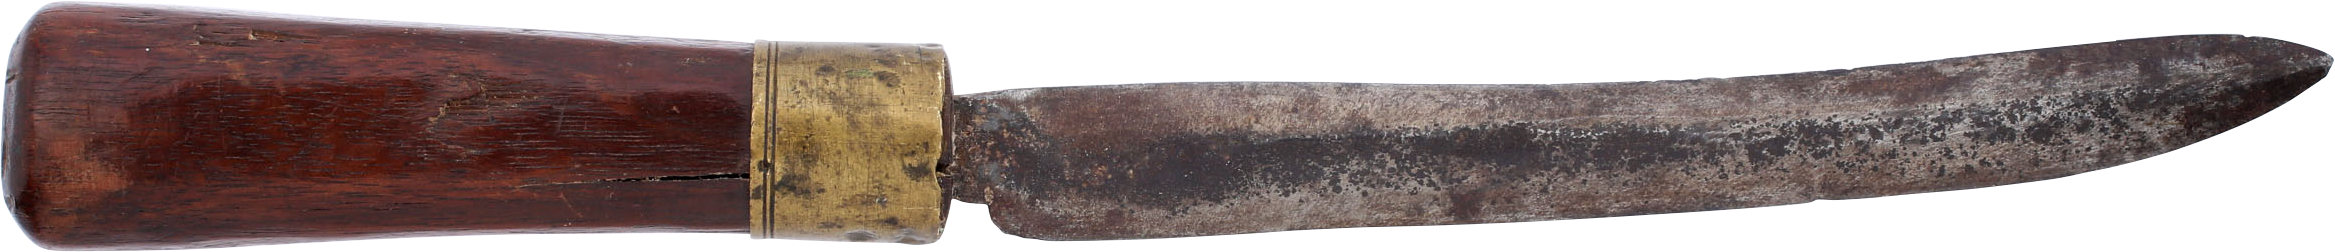 COLONIAL AMERICAN RIFLEMAN’S POUCH KNIFE C.1750-80